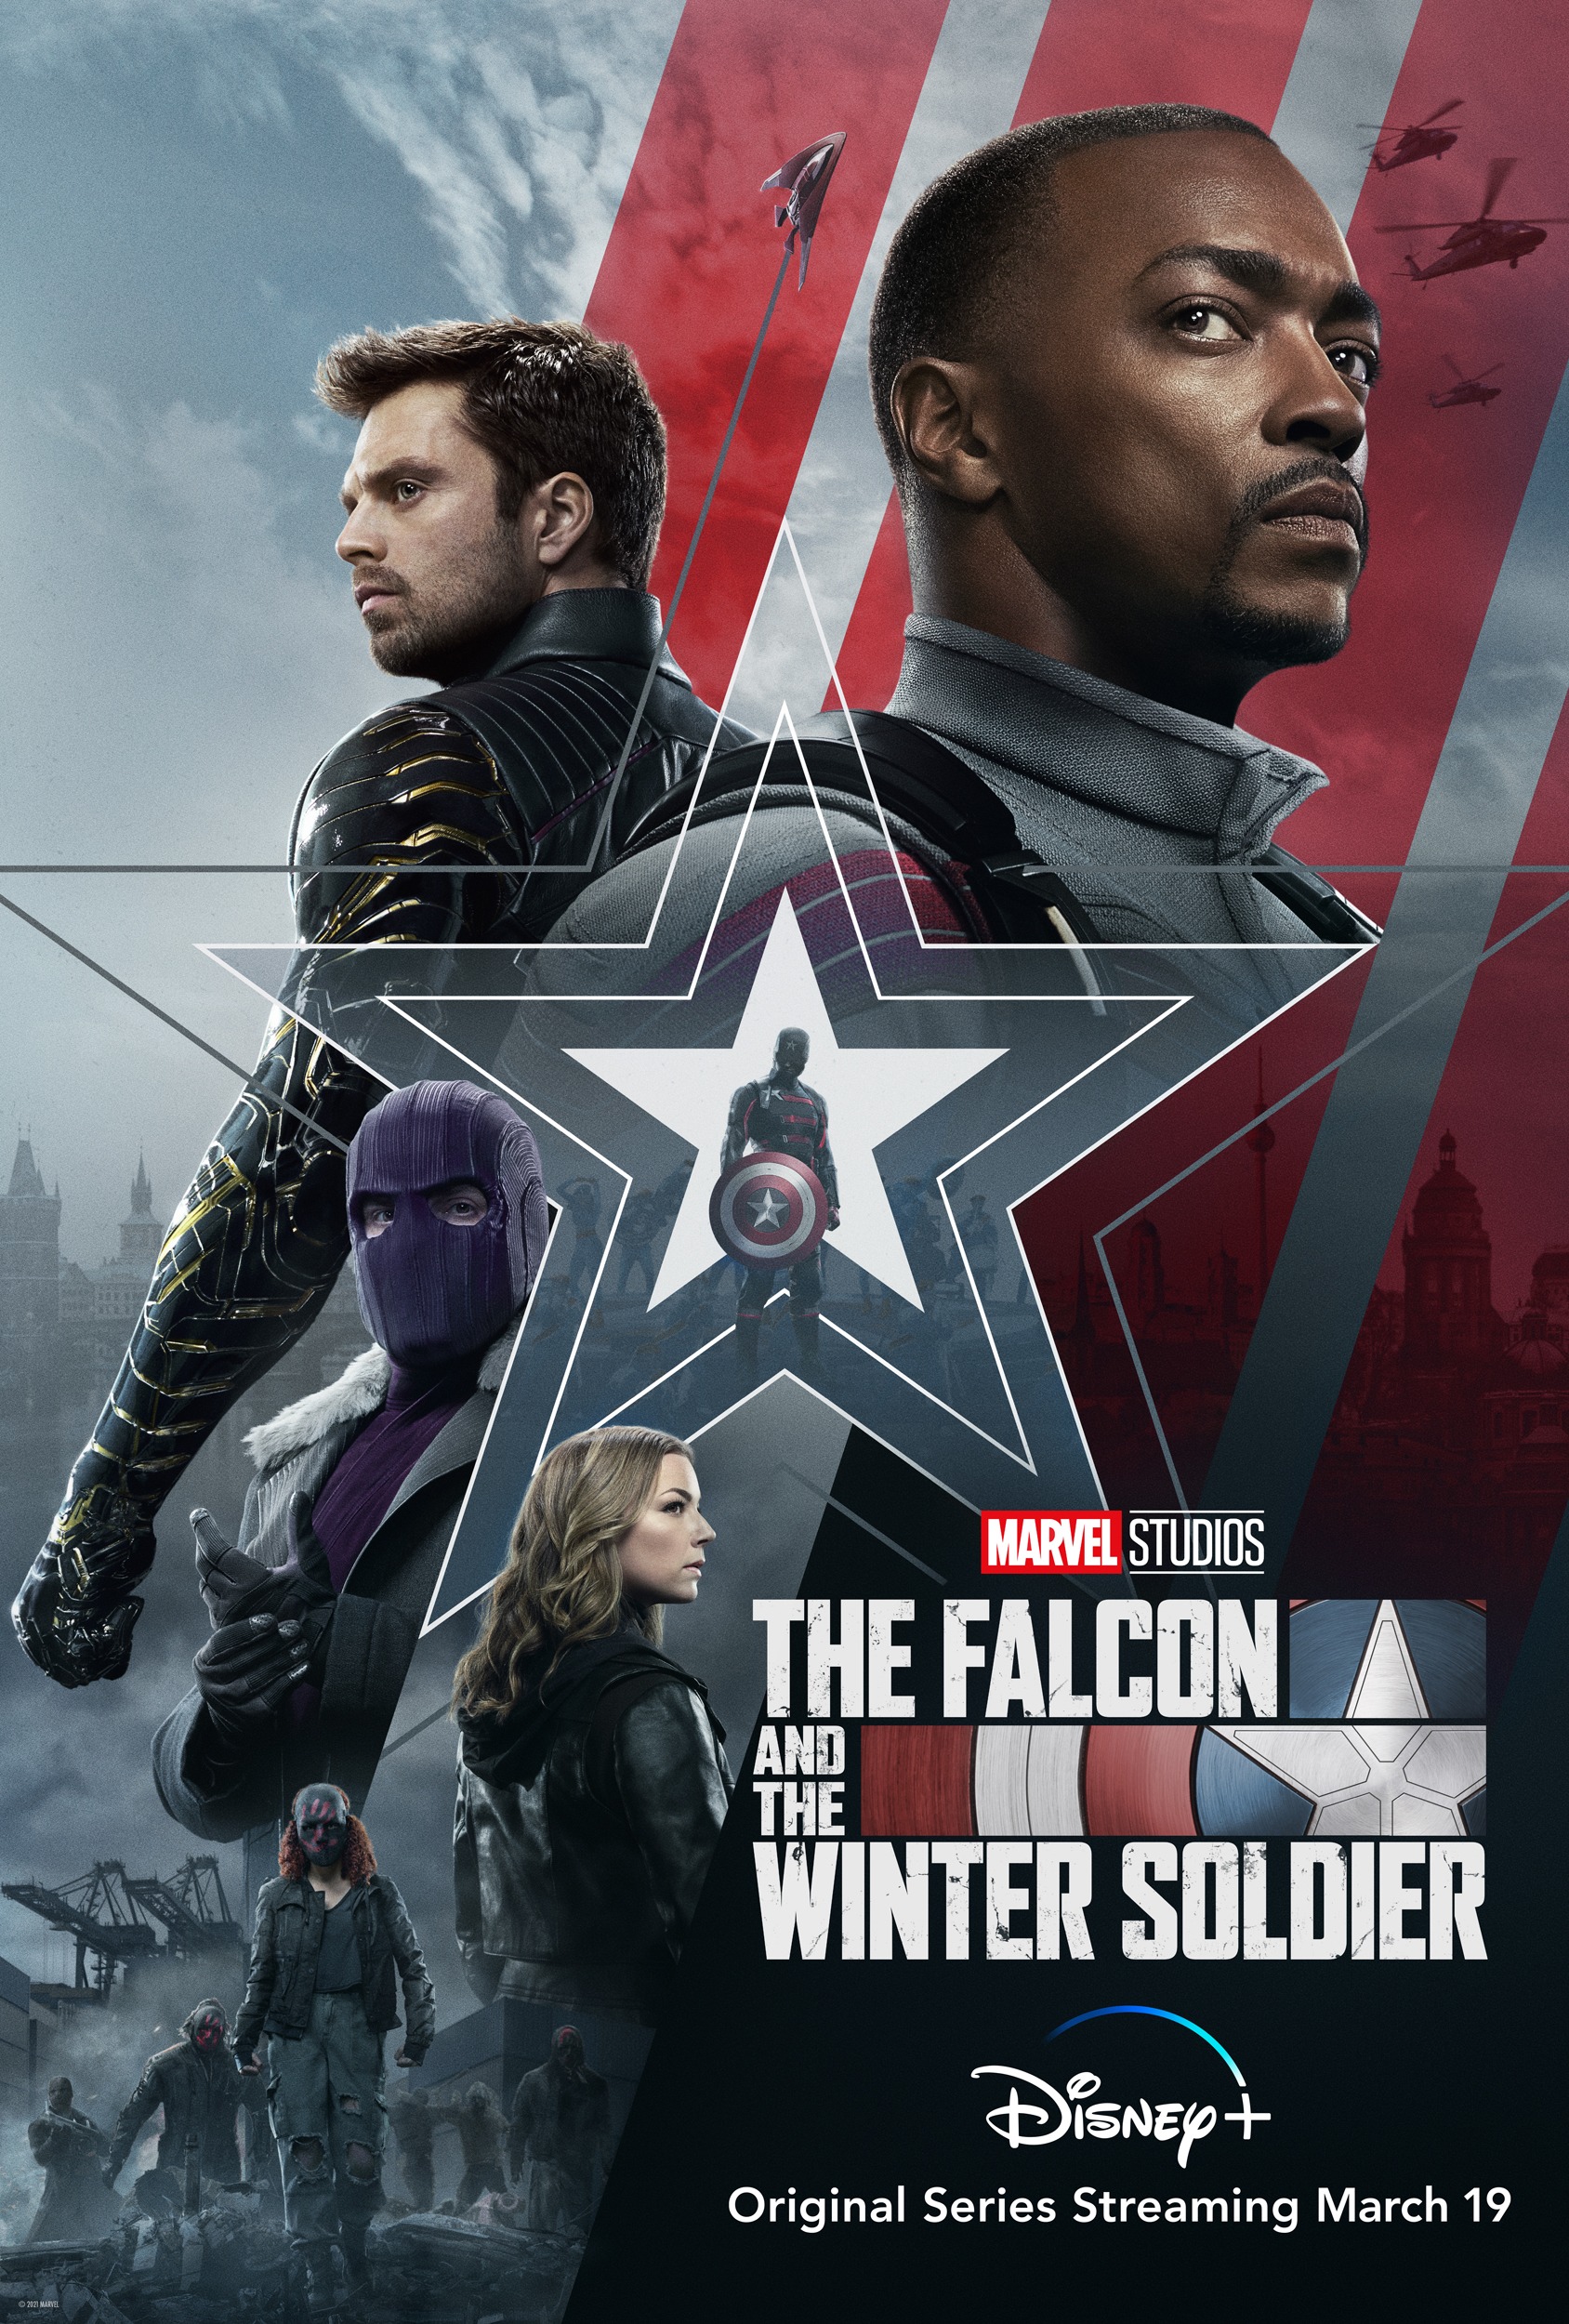 The Falcon and the Winter Soldier (2021) S1 B1-6 256Kbps 23.976Fps 48Khz 5.1Ch DD+ DSNP E-AC3